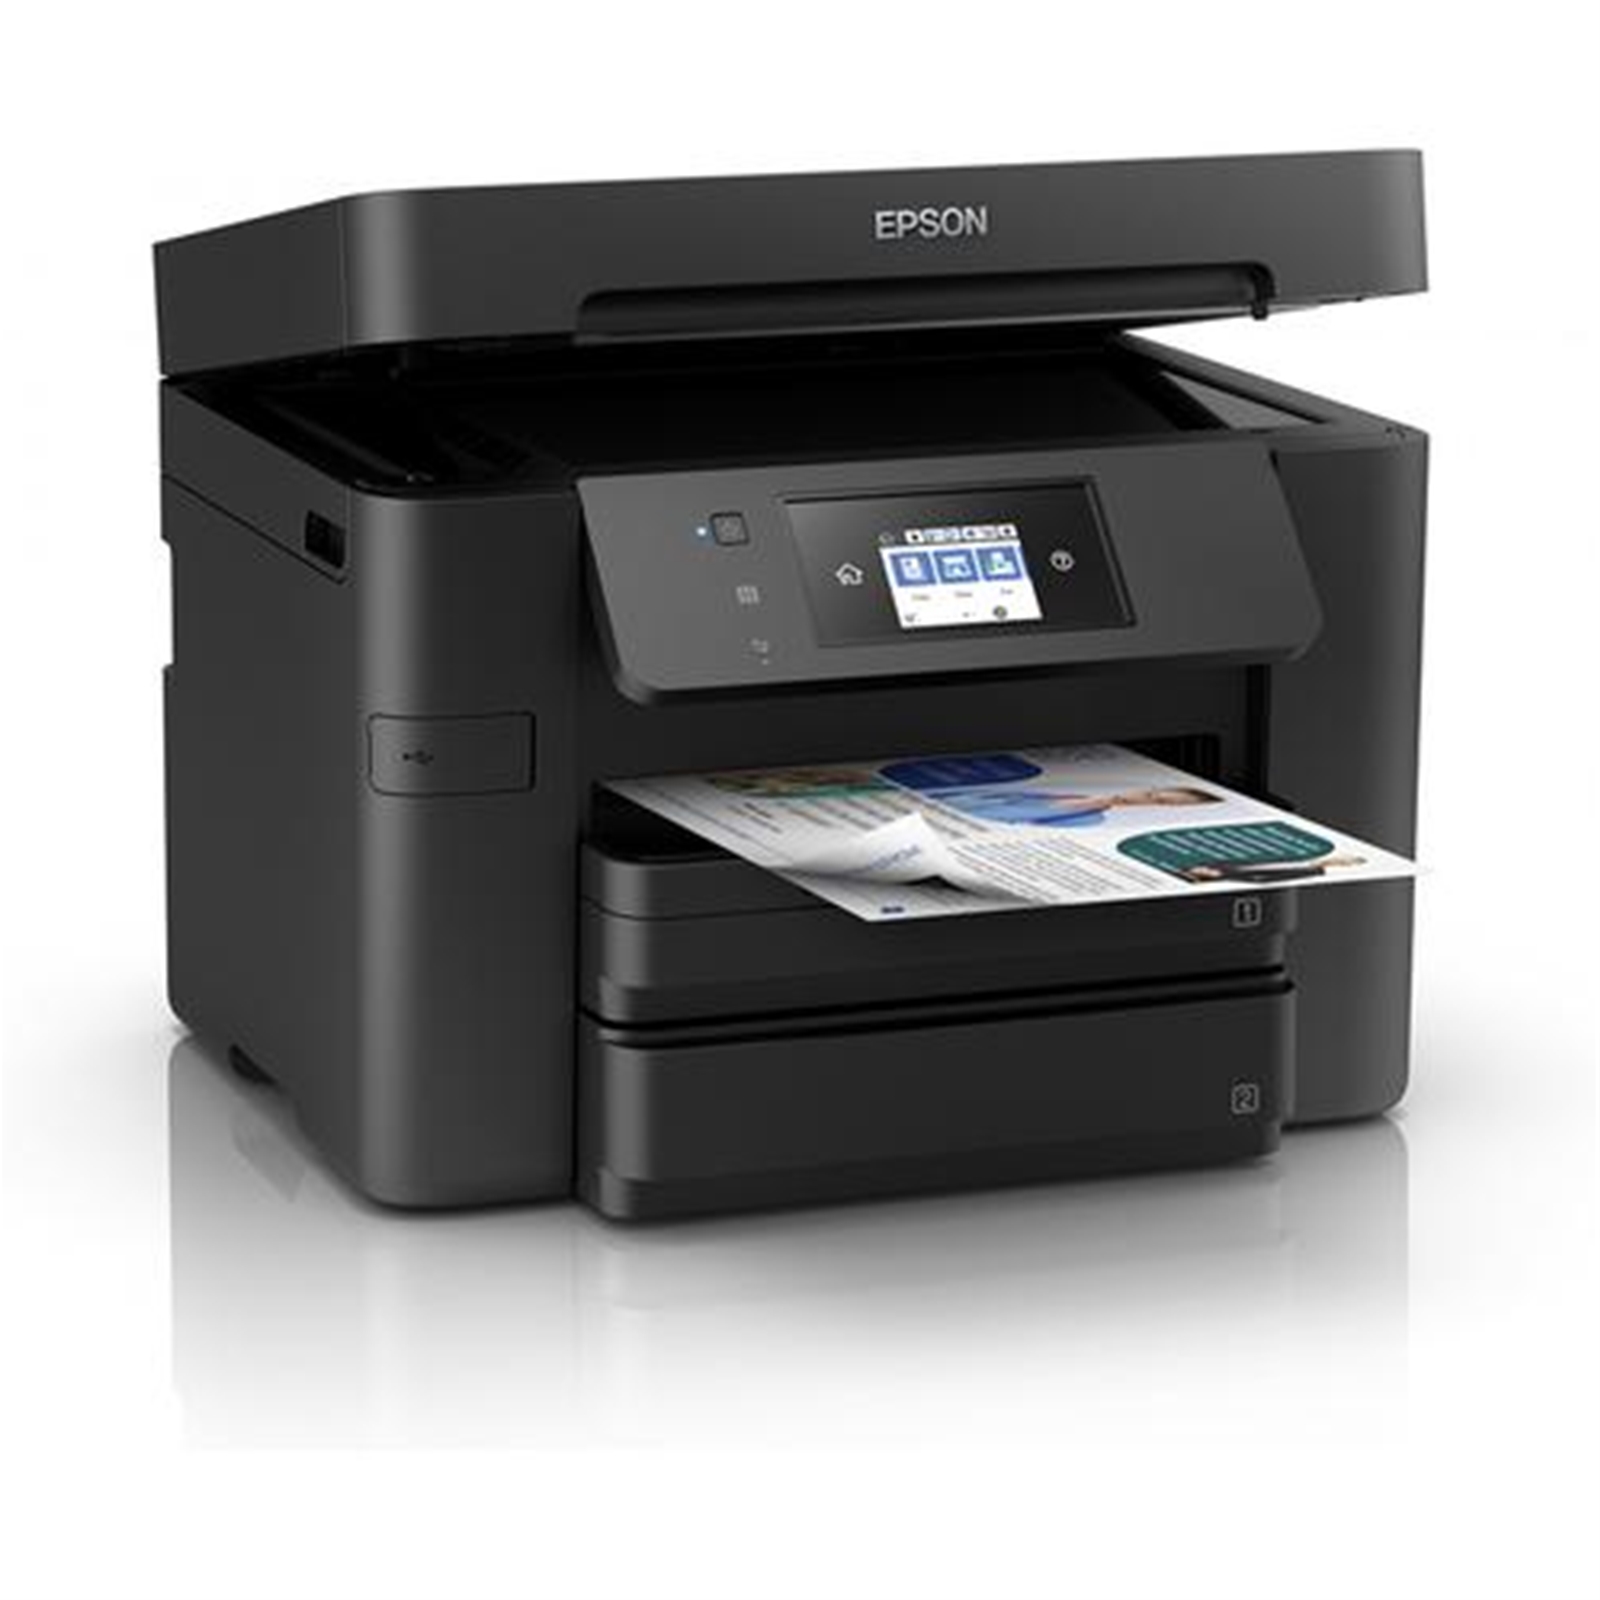 Epson WorkForce Pro WF-4830DTWF C11CJ05401 Inkjet Printer, A4, Wireless, Touchcreen, All-in-One inc Fax, Ethernet, Double Sided Print